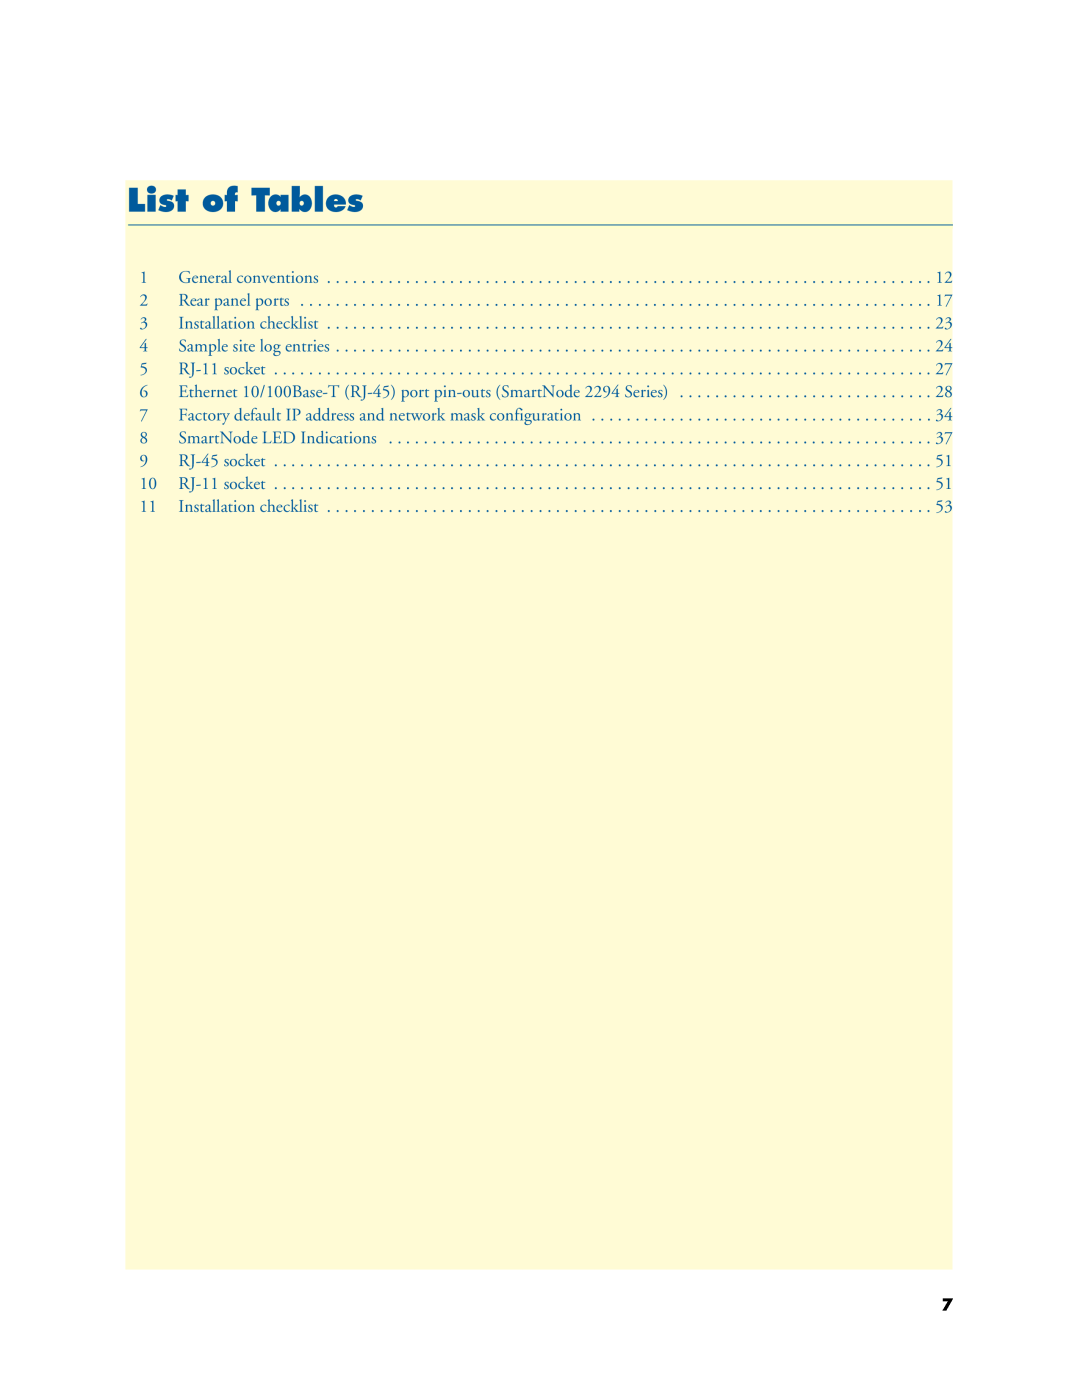 Patton electronic 2292, 2294 manual List of Tables 